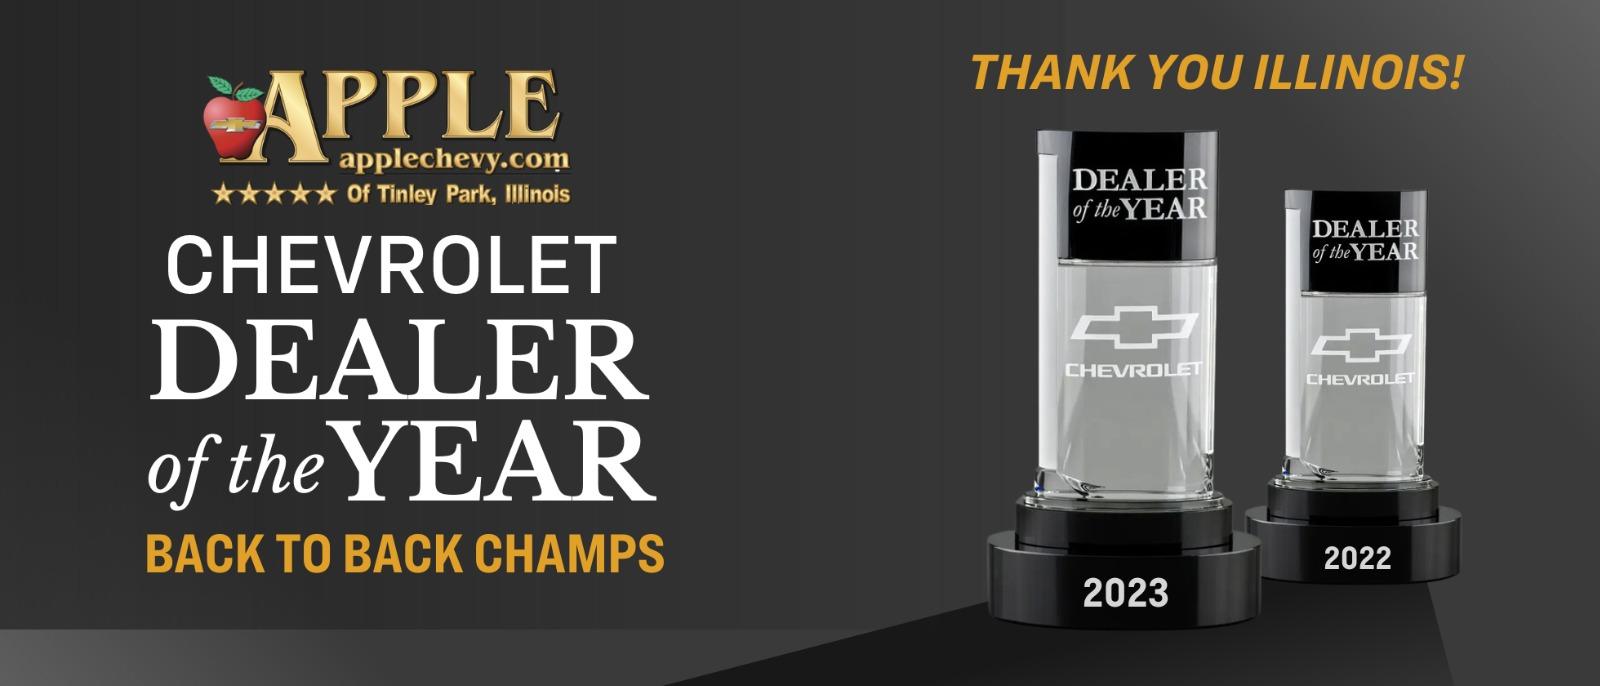 CHEVROLET DEALER OF THE YEAR BACK TO BACK CHAMPS